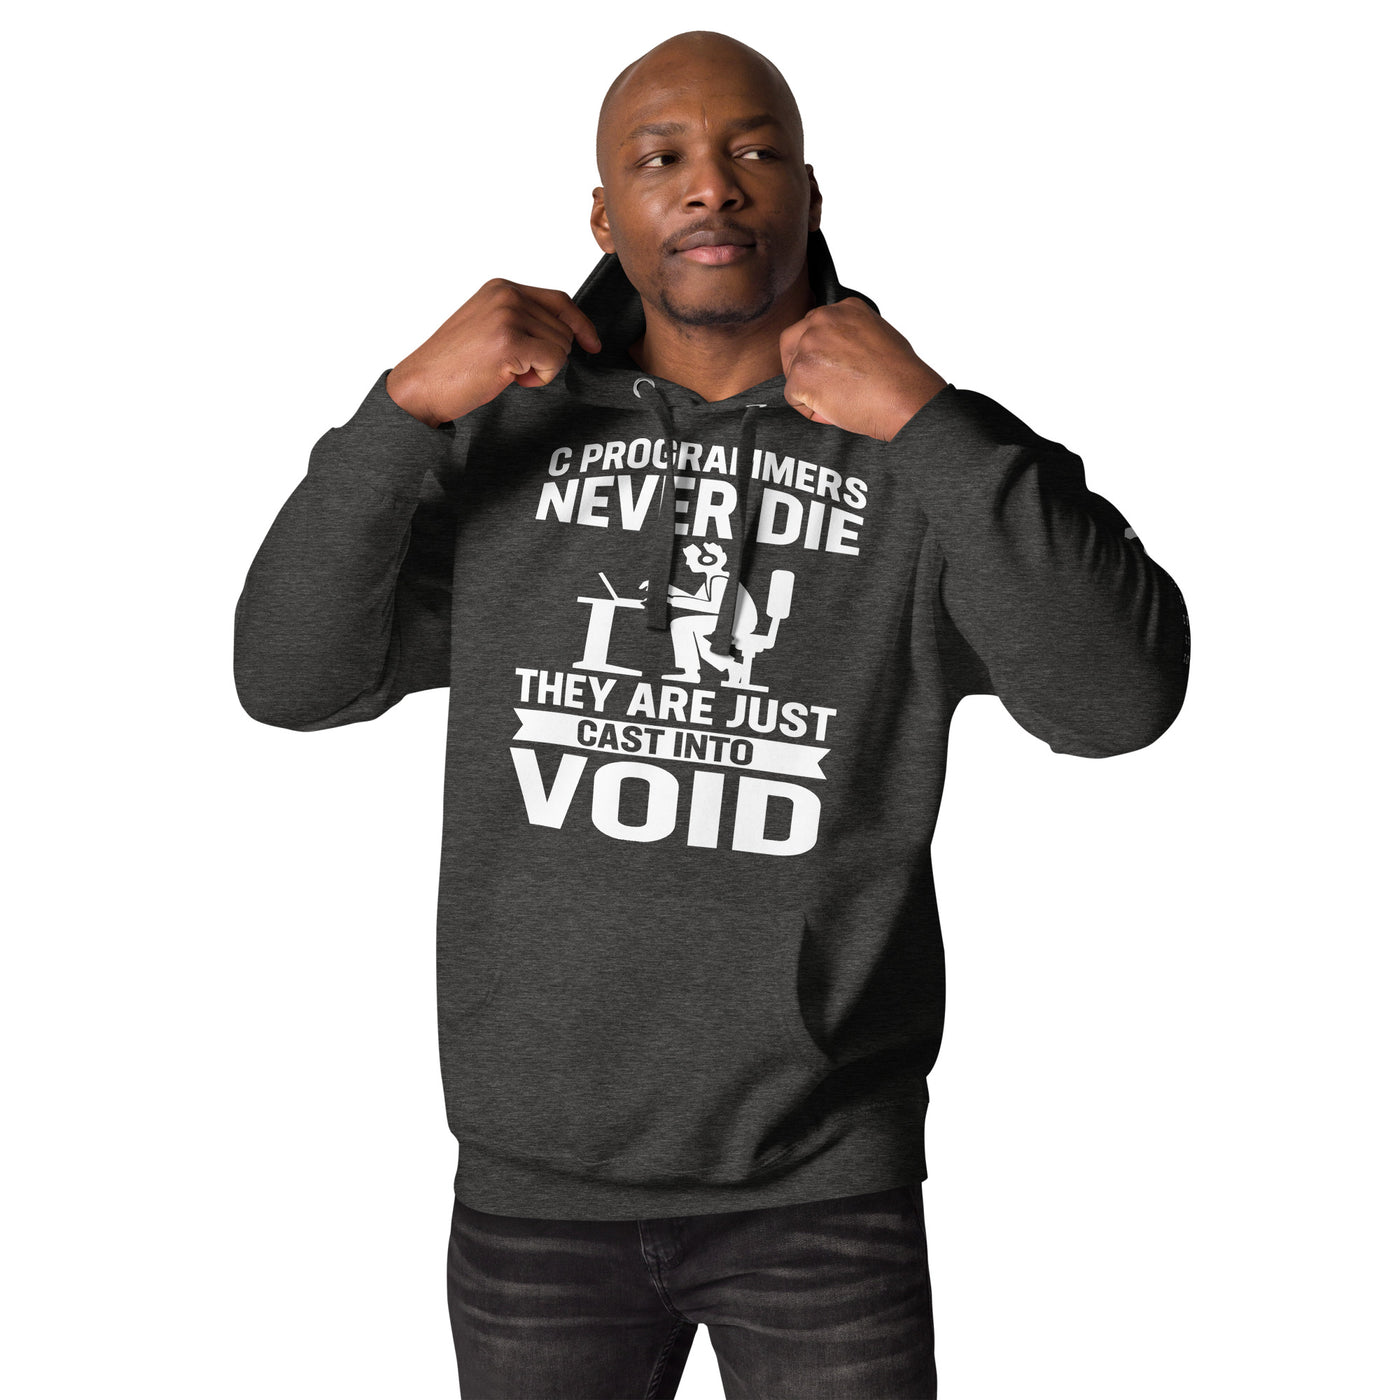 Programmers Never Die They are Just Cast Into Void Unisex Hoodie